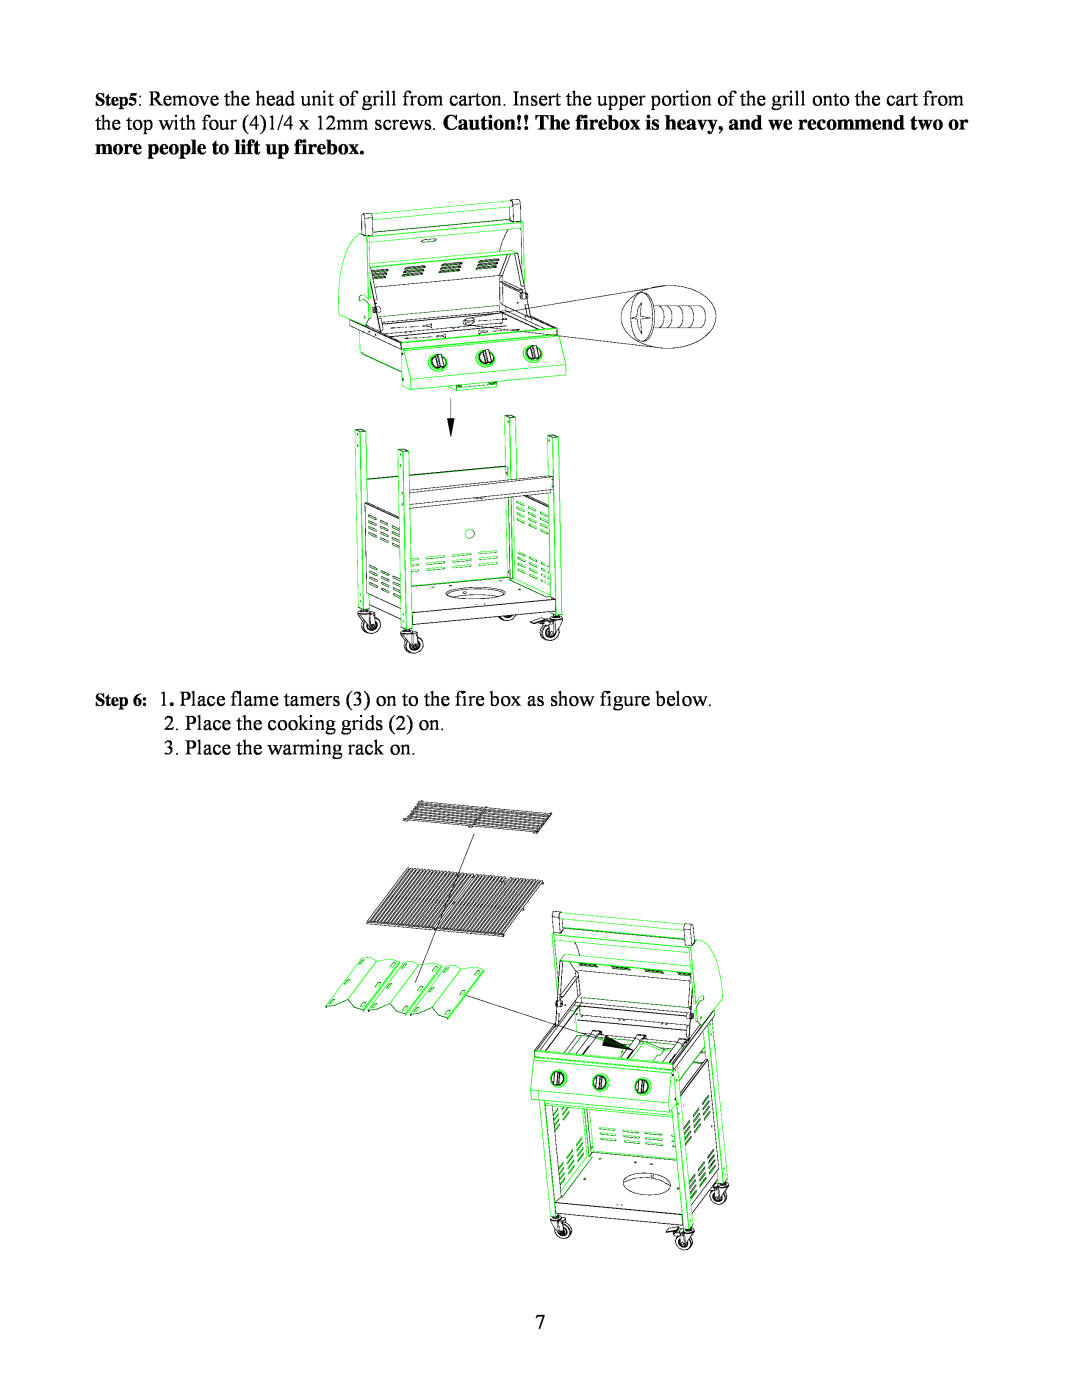 Nexgrill 720-0230 manual more people to lift up firebox, Place the cooking grids 2 on 3. Place the warming rack on 